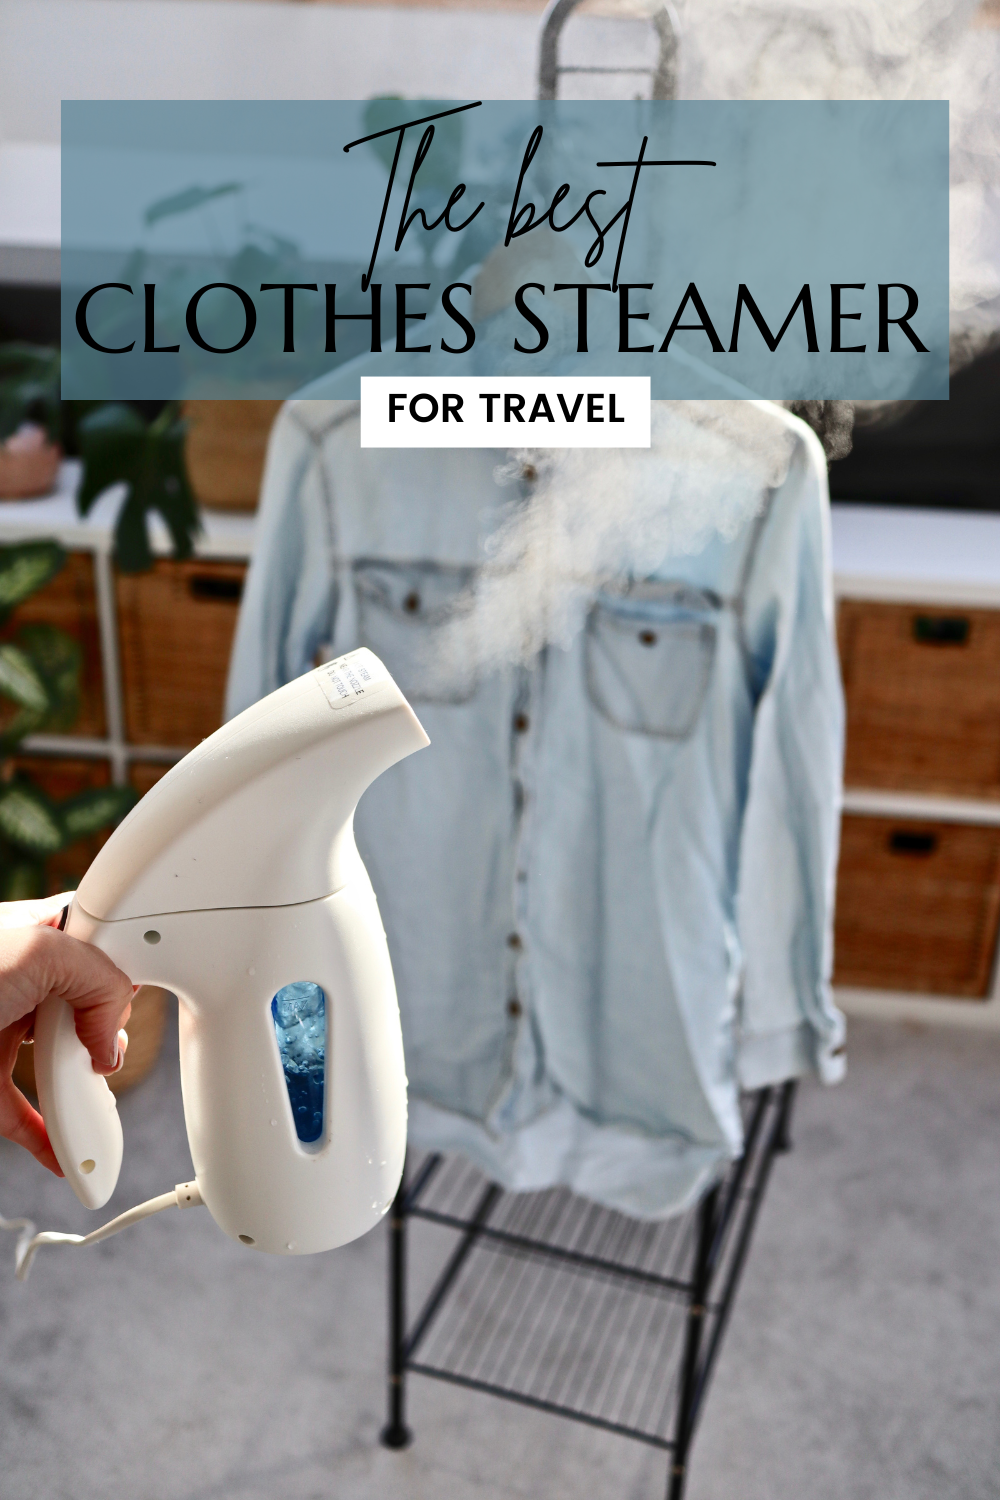 Clothes Steamers Are Better Than Irons: Here's Why